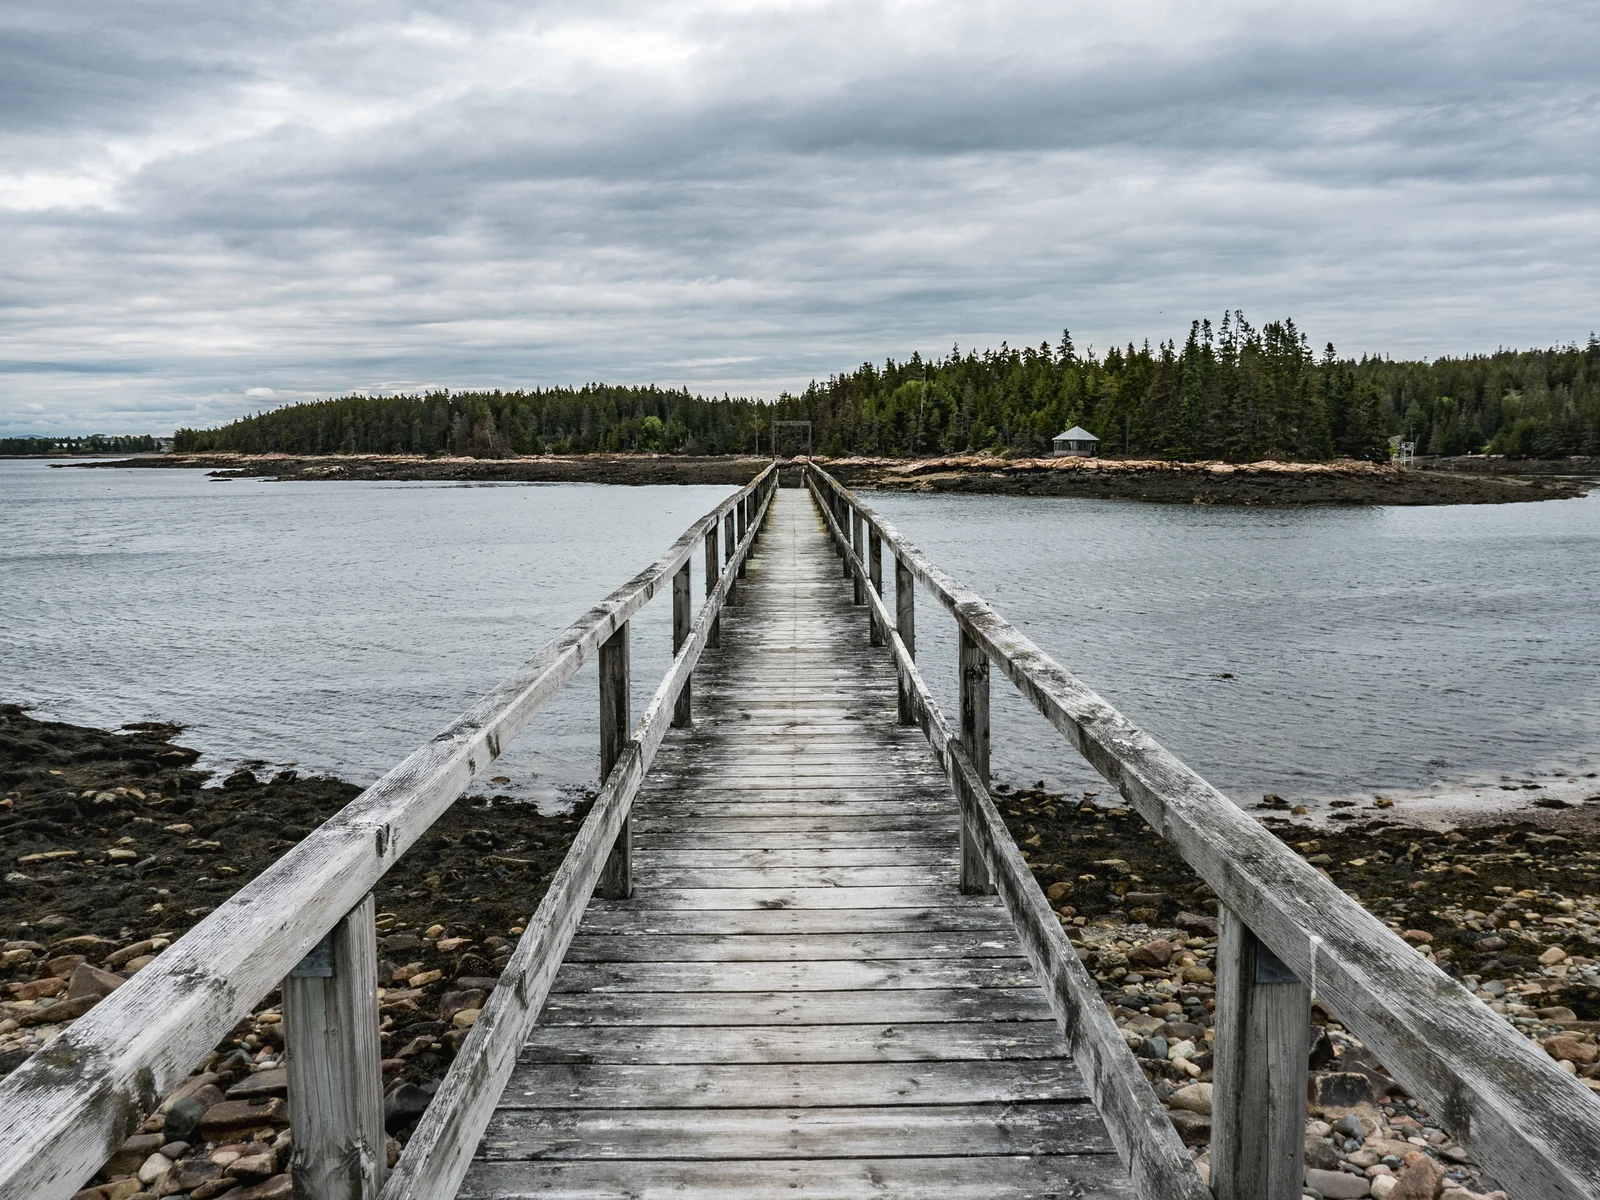 Bridge at Frazer Point pictured during the Least Busy Time to Visit Acadia National Park